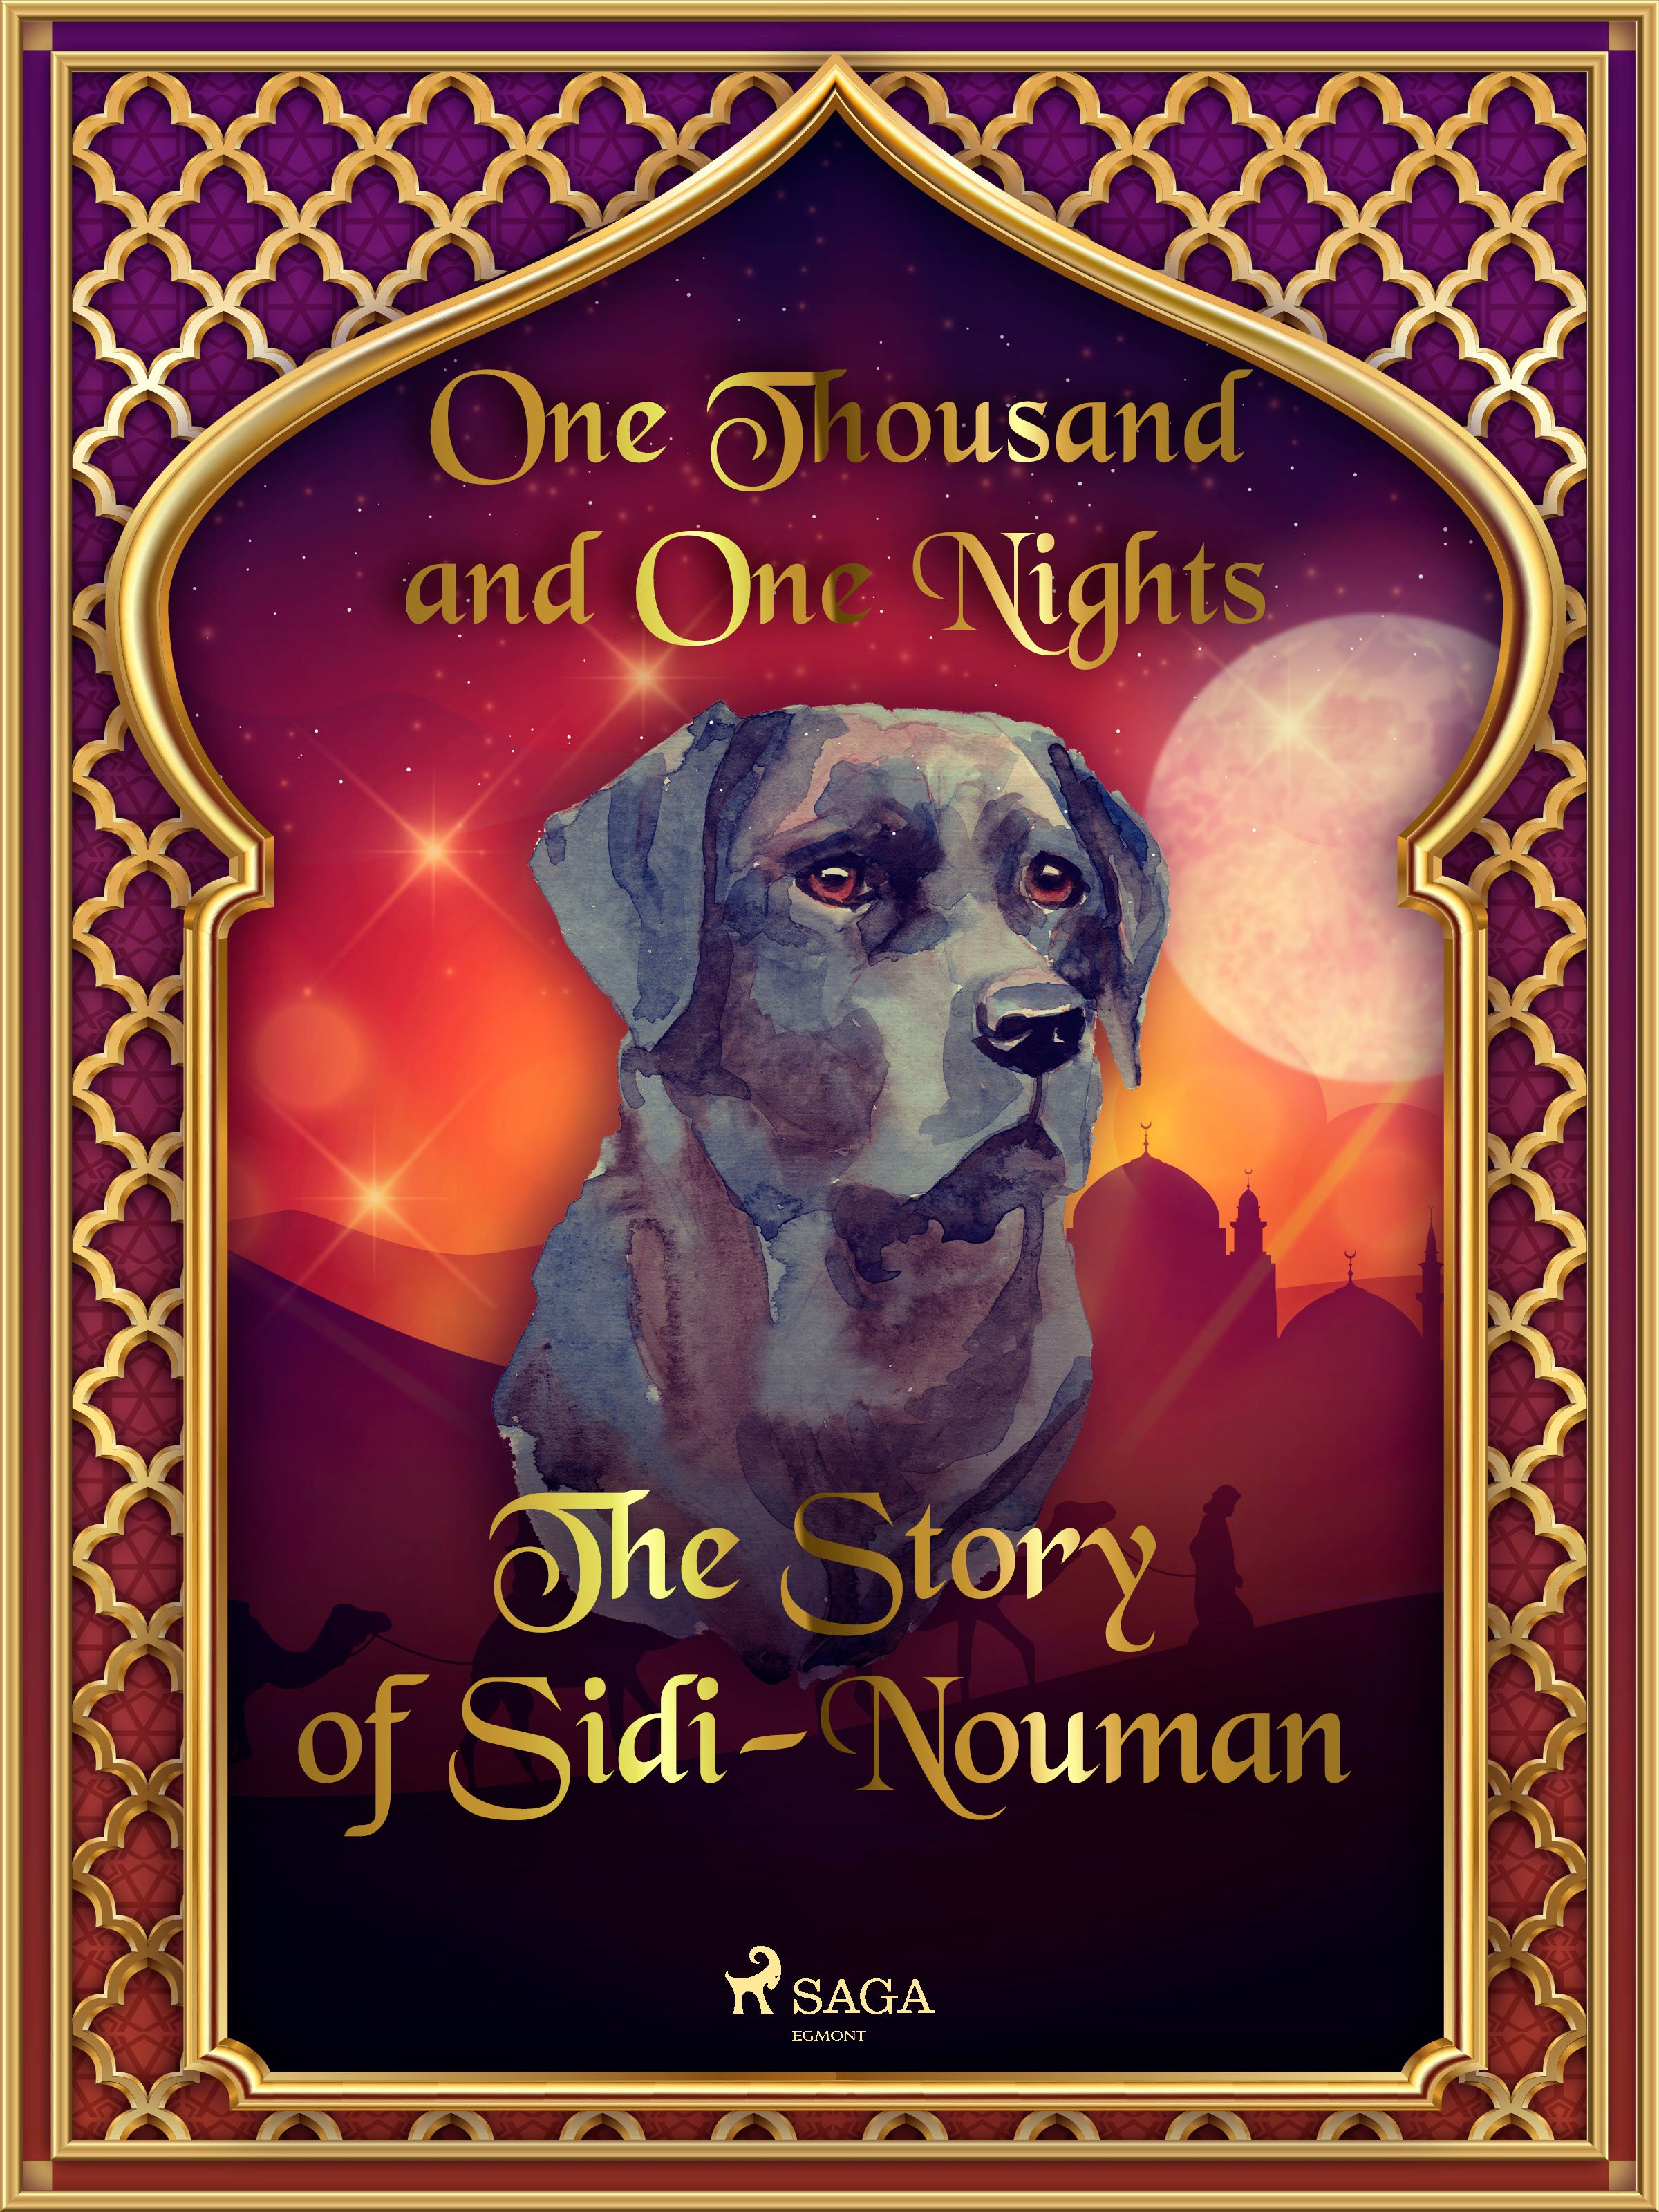 The Story of Sidi-Nouman, eBook by One Thousand and One Nights